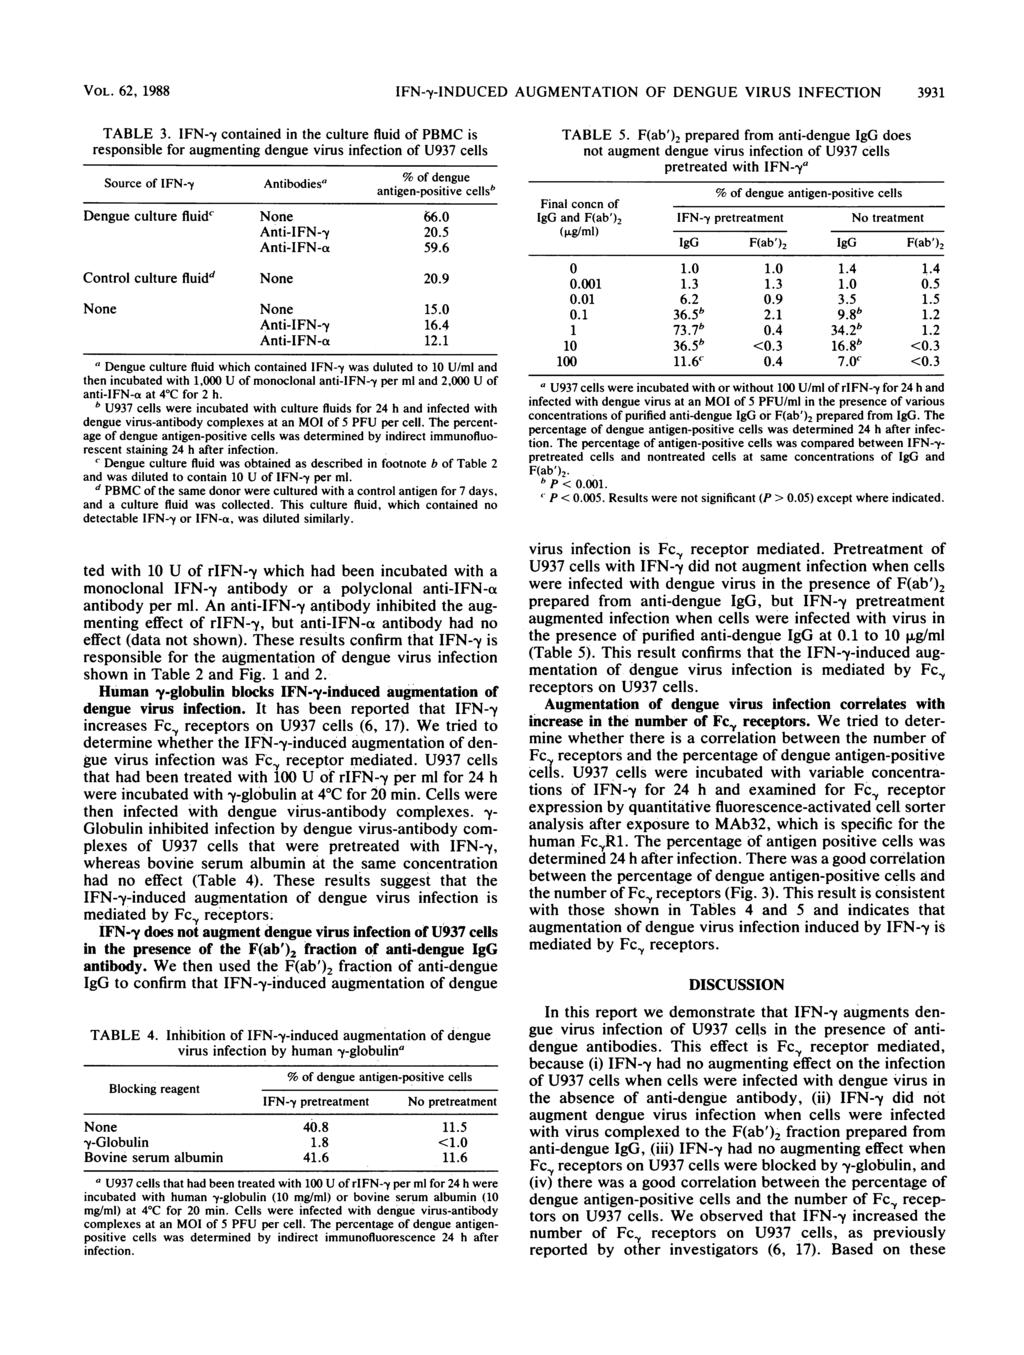 VOL. 62, 1988 IFN-y-INDUCED AUGMENTATION OF DENGUE VIRUS INFECTION 3931 TABLE 3.